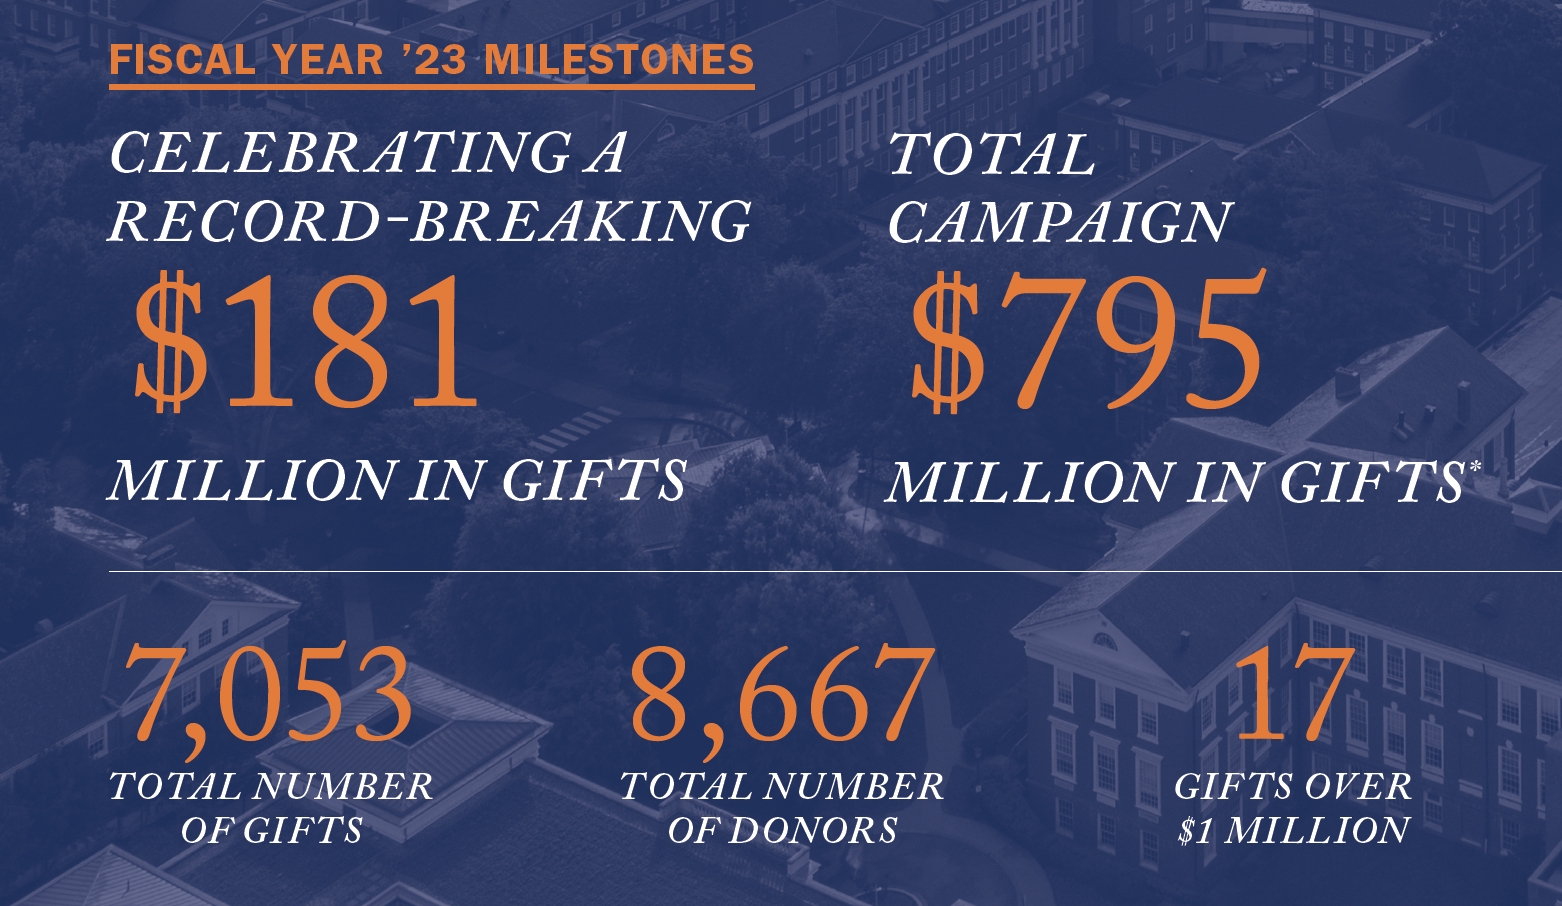 CELEBRATING A RECORD-BREAKING $181 MILLION IN GIFTS 7,053 TOTAL NUMBER OF GIFTS 8,667 TOTAL NUMBER OF DONORS 17 GIFTS OVER $1 MILLION TOTAL CAMPAIGN $795 MILLION IN GIFTS*